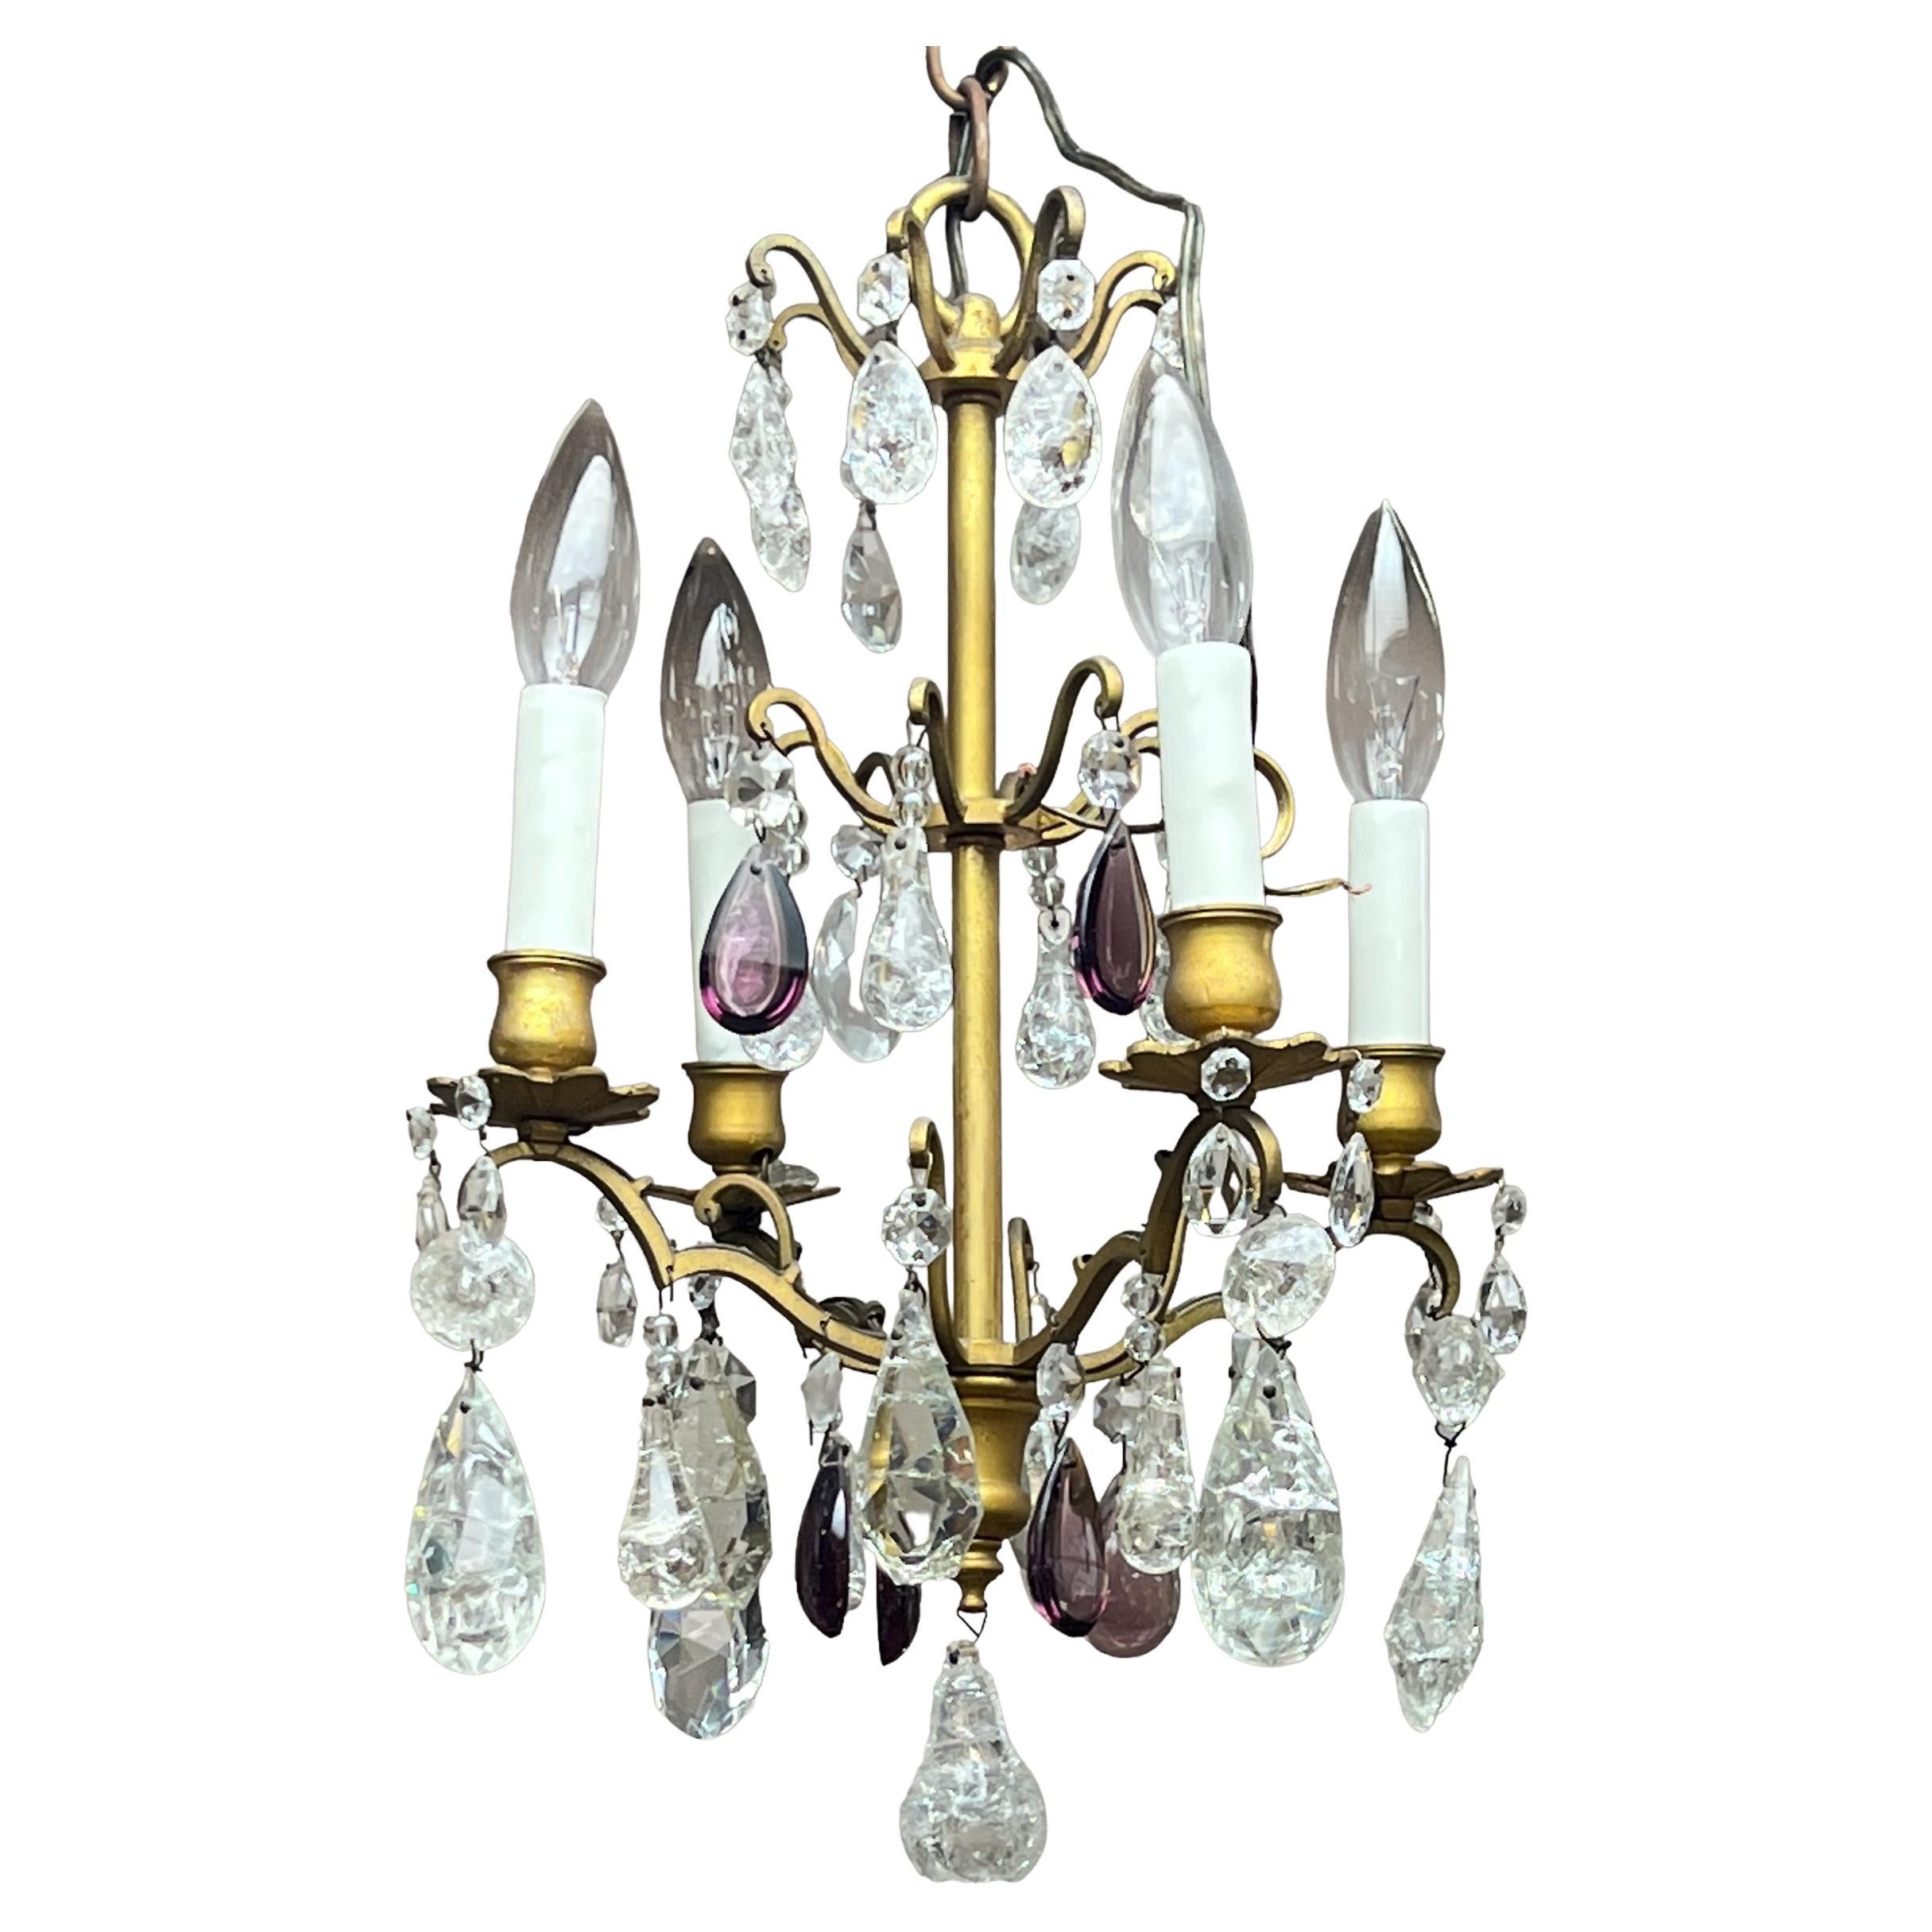 Antique Belle Epoque Period Rock Crystal and Bronze Chandelier For Sale